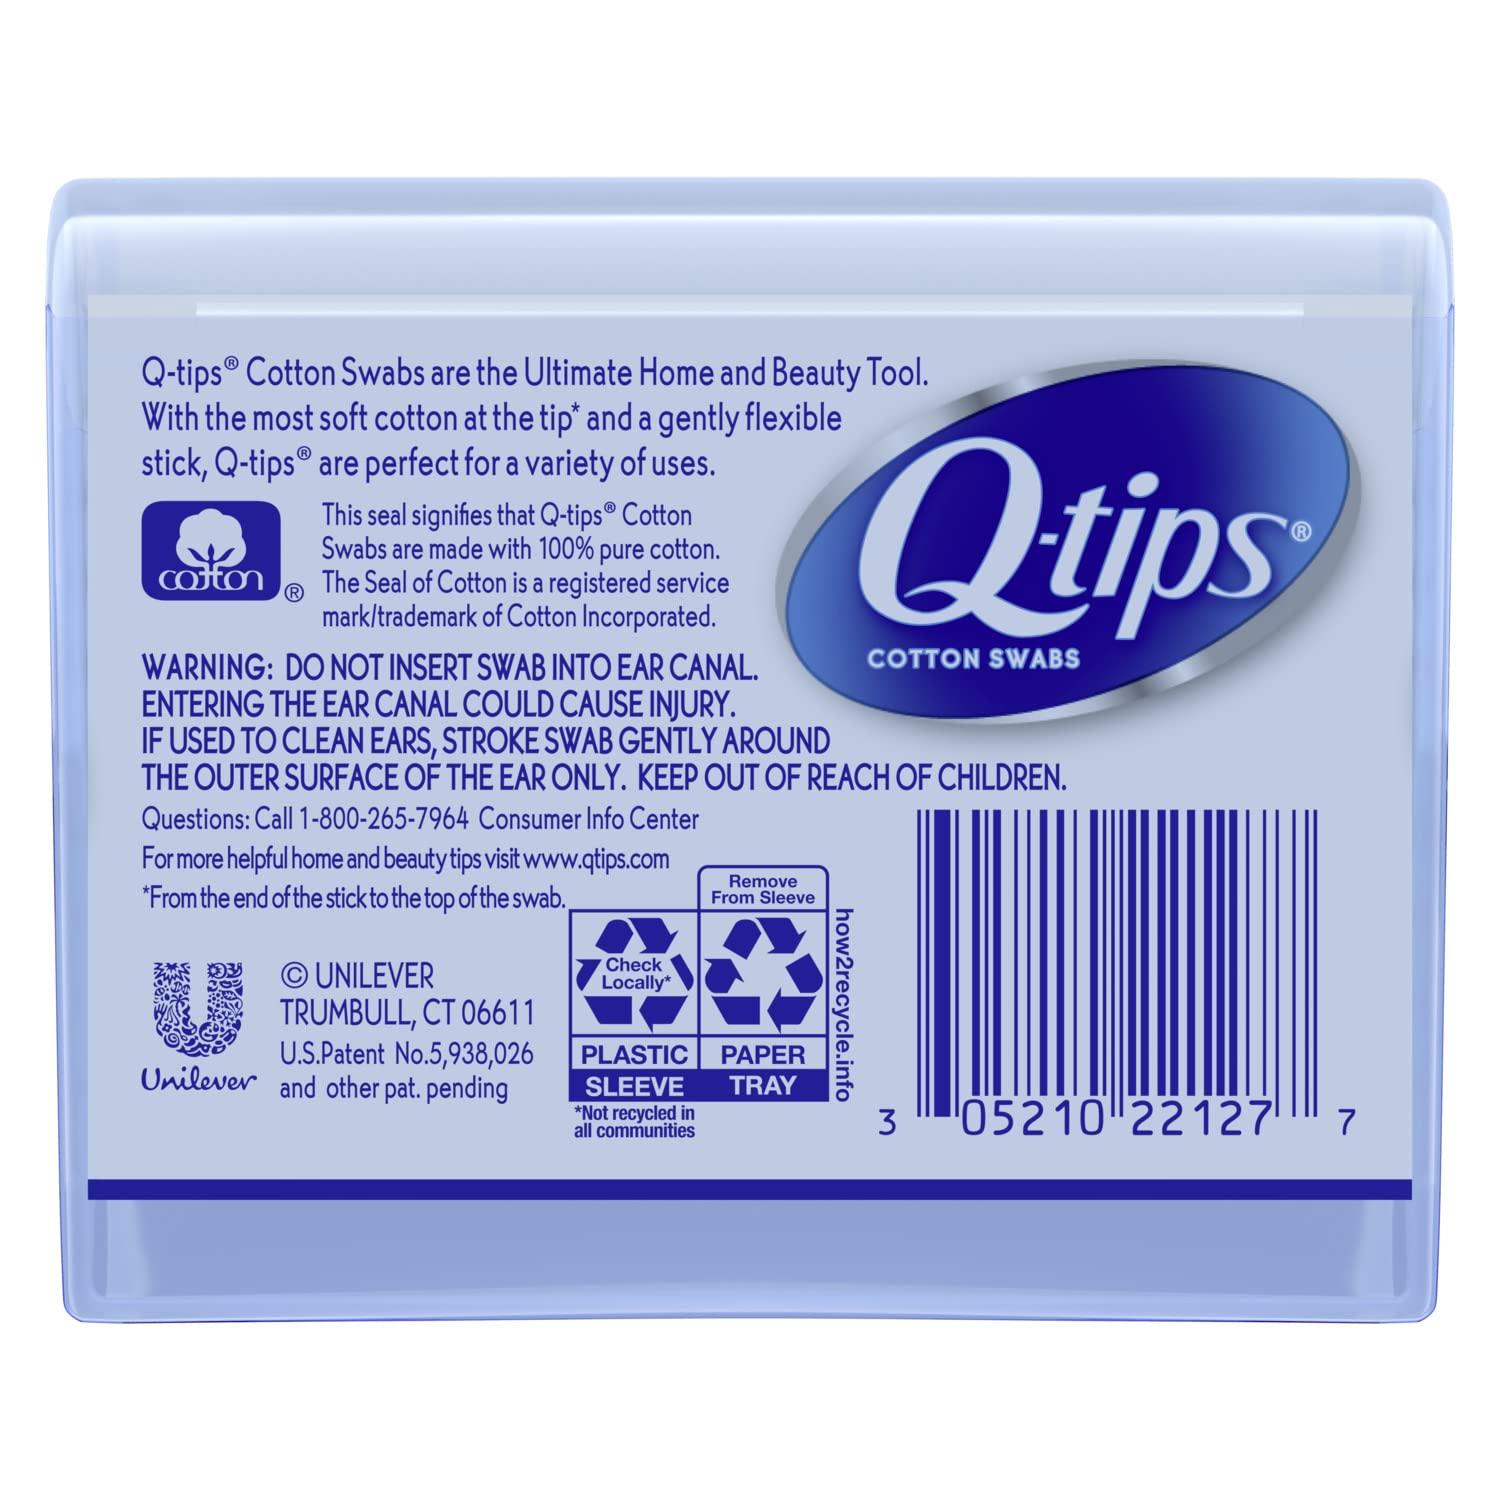  Q-tips Cotton Swabs - Travel Q-tips for Beauty, Makeup, Nails,  Men's Grooming, and More, Perfect for On the Go, Travel Size Case, 30 Count  Ea (Pack of 3) : Facial